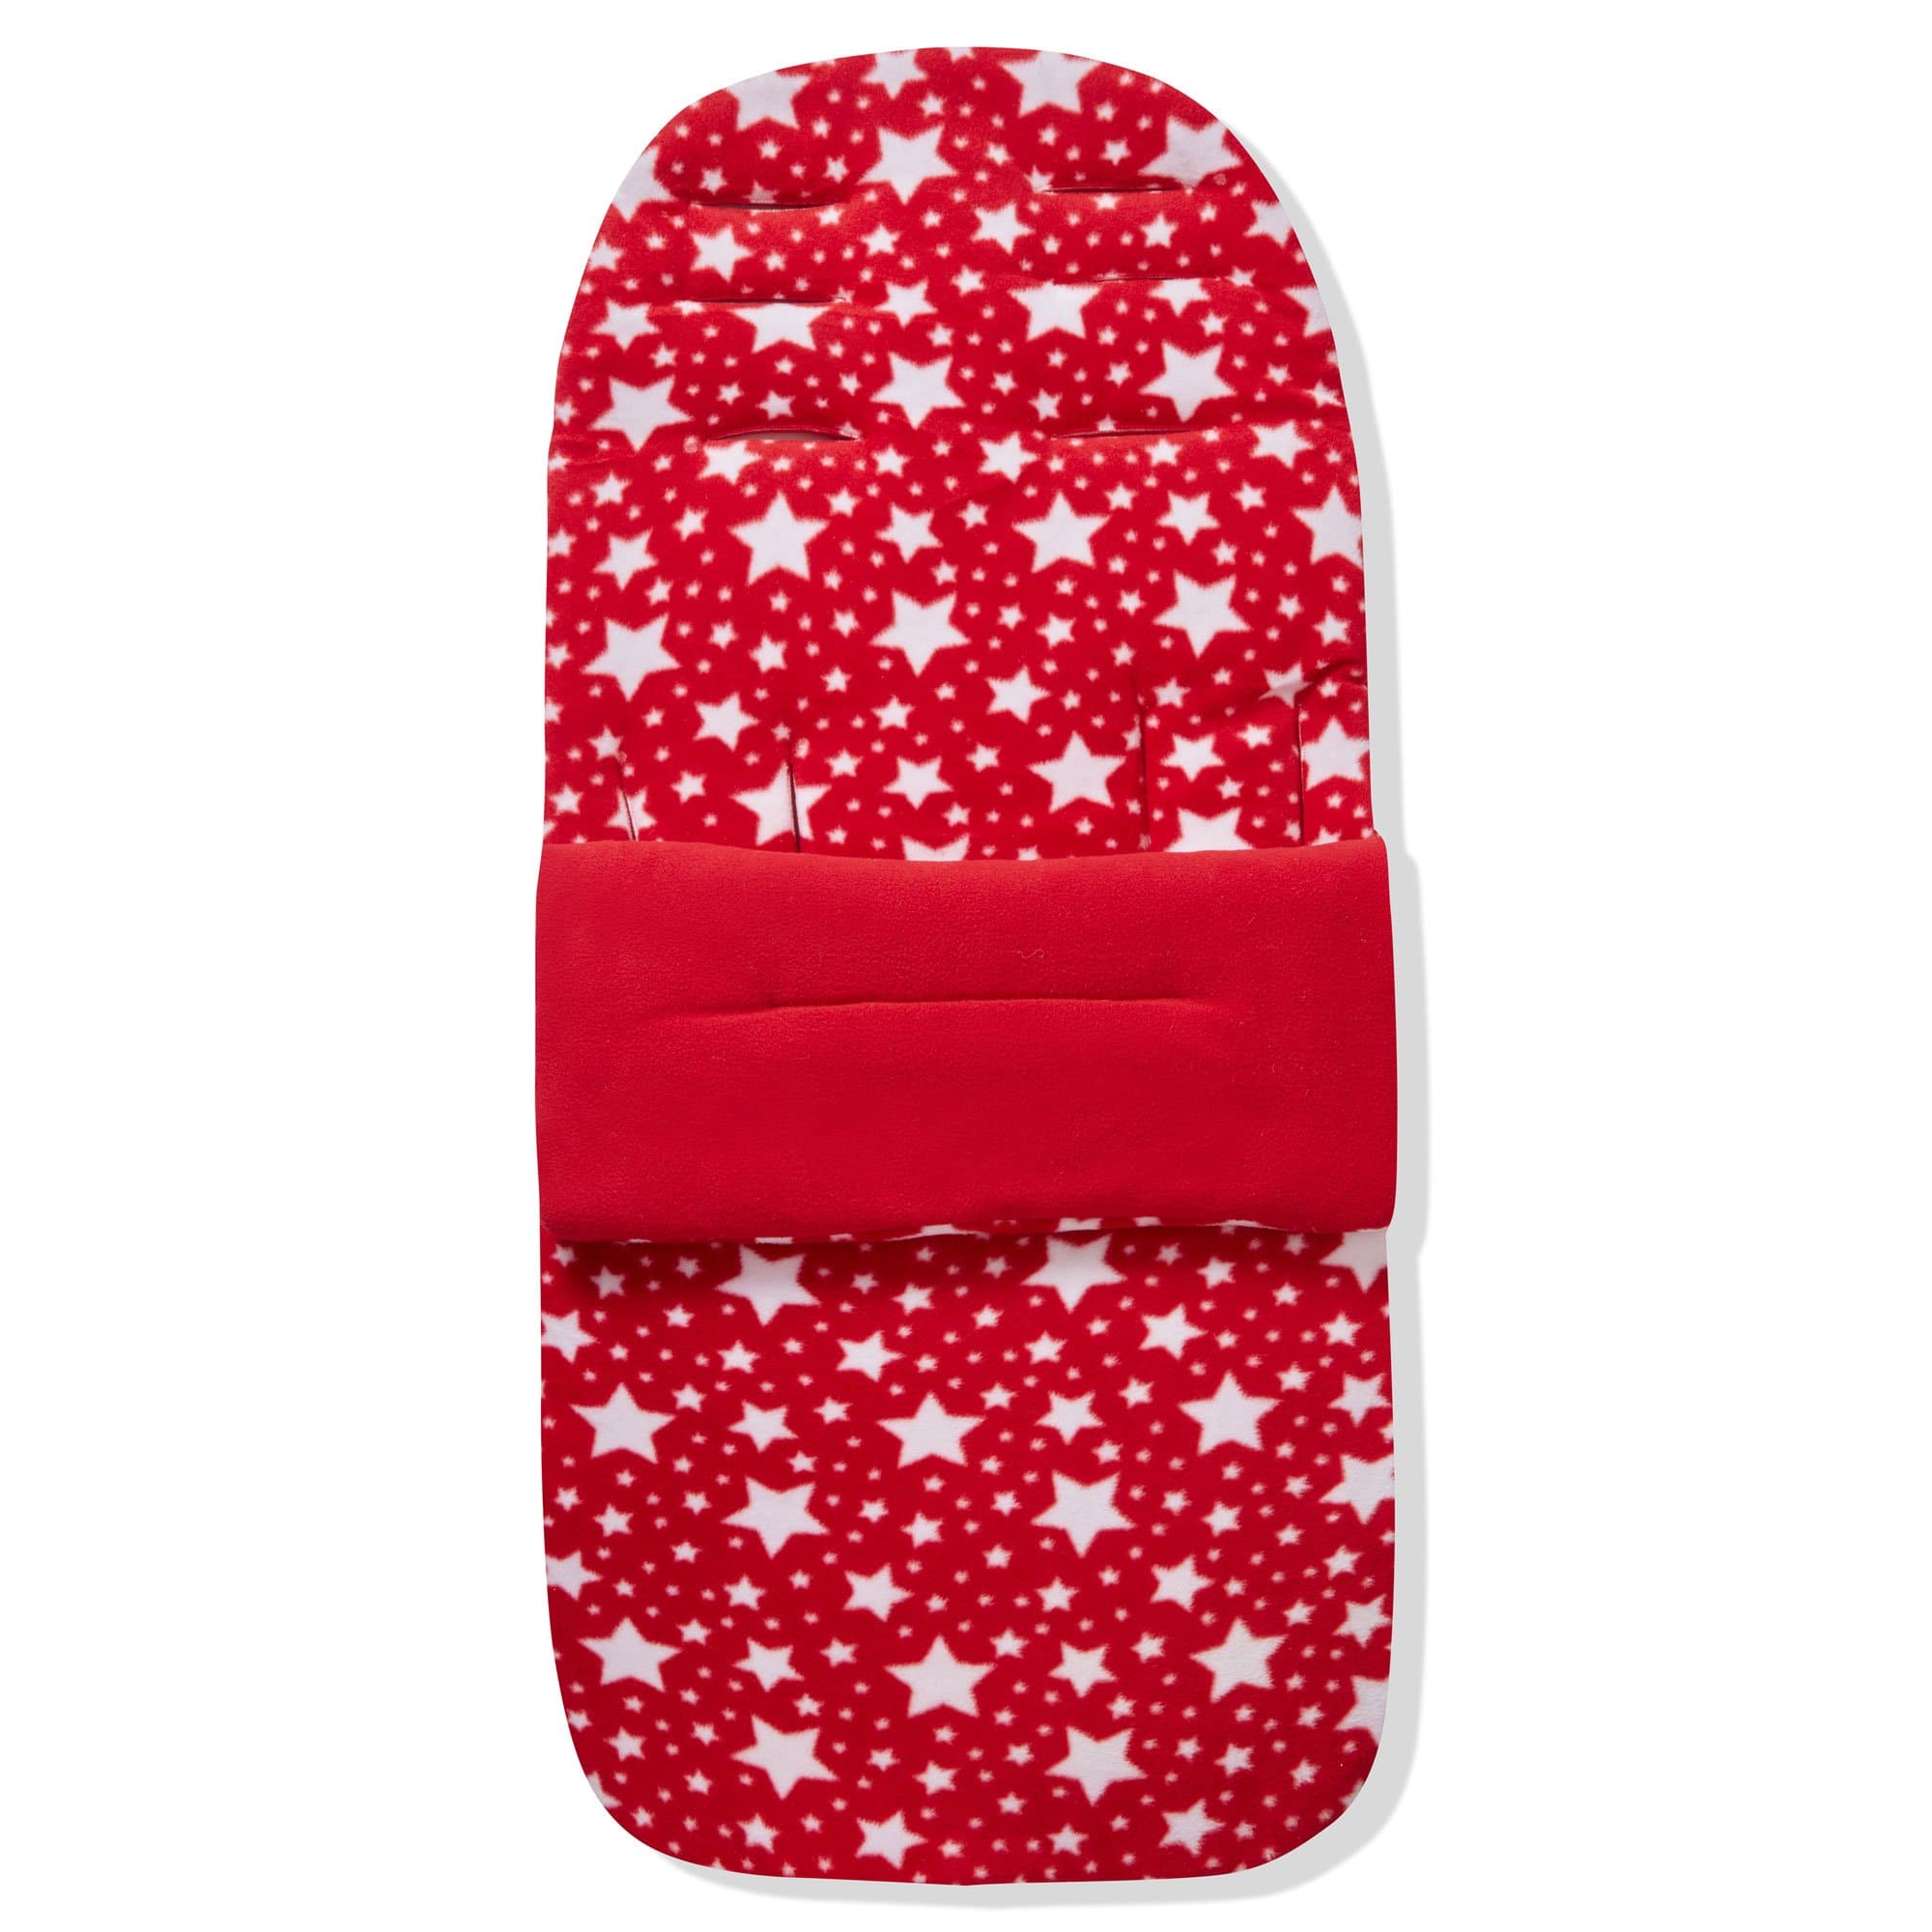 Fleece Footmuff / Cosy Toes Compatible With Britax - Red Star / Fits All Models | For Your Little One